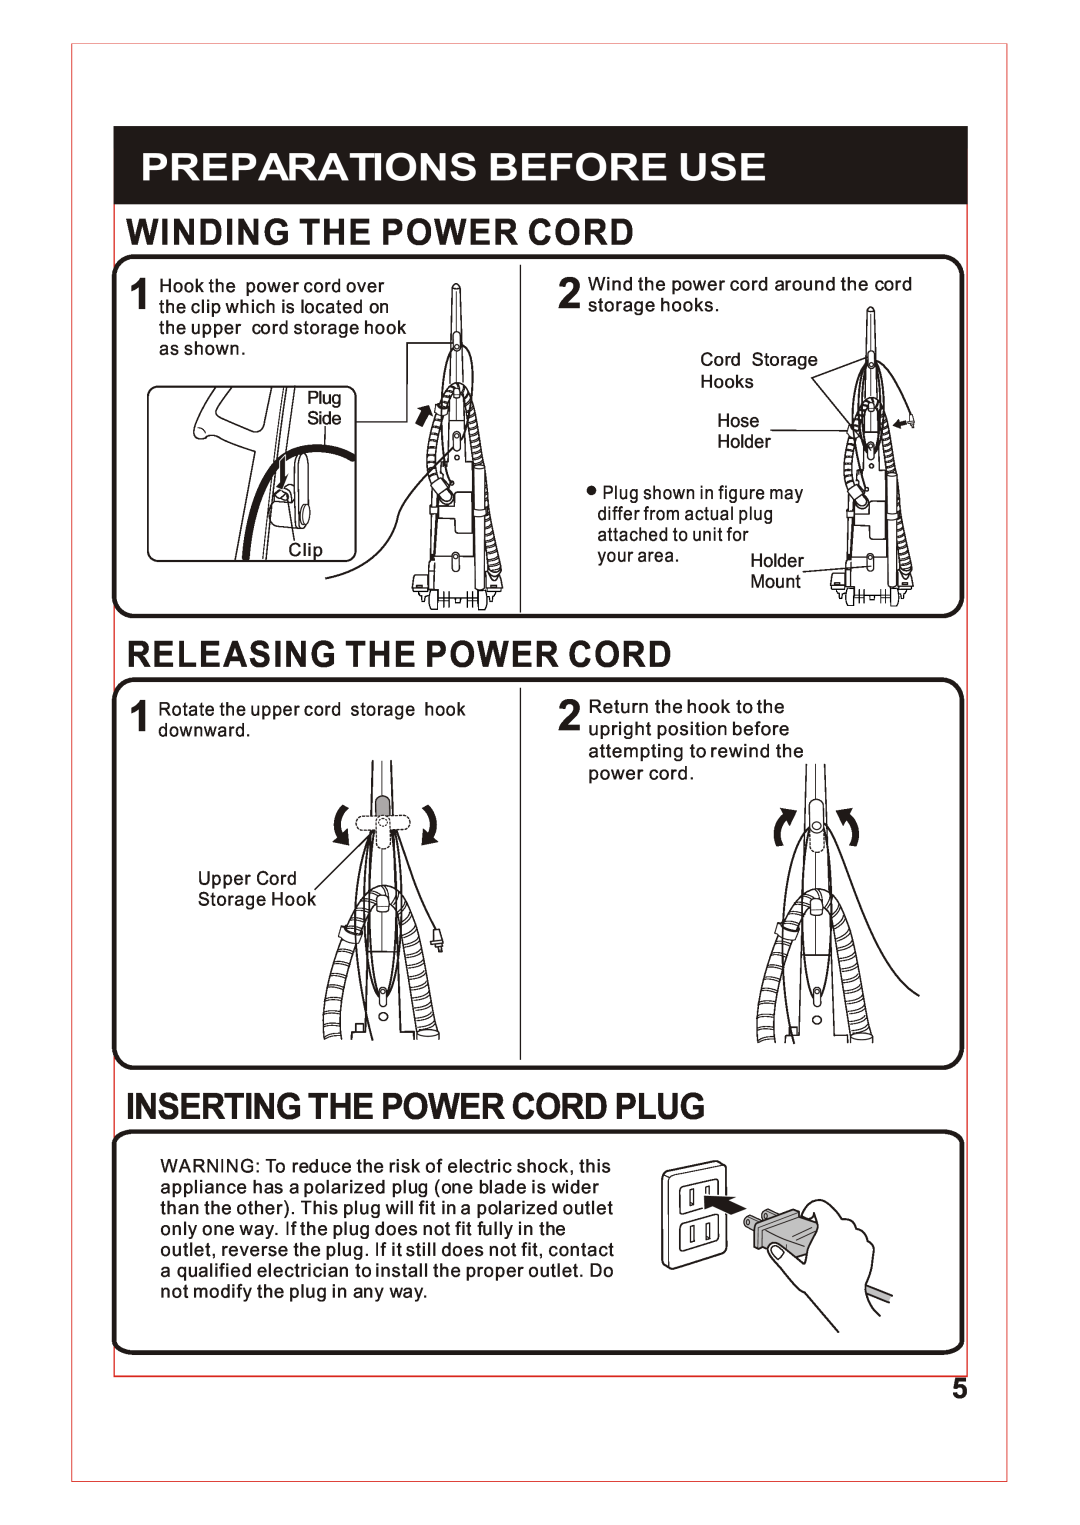 Fantom Vacuum FM740 B instruction manual Winding The Power Cord, Releasing The Power Cord, Inserting The Power Cord Plug 